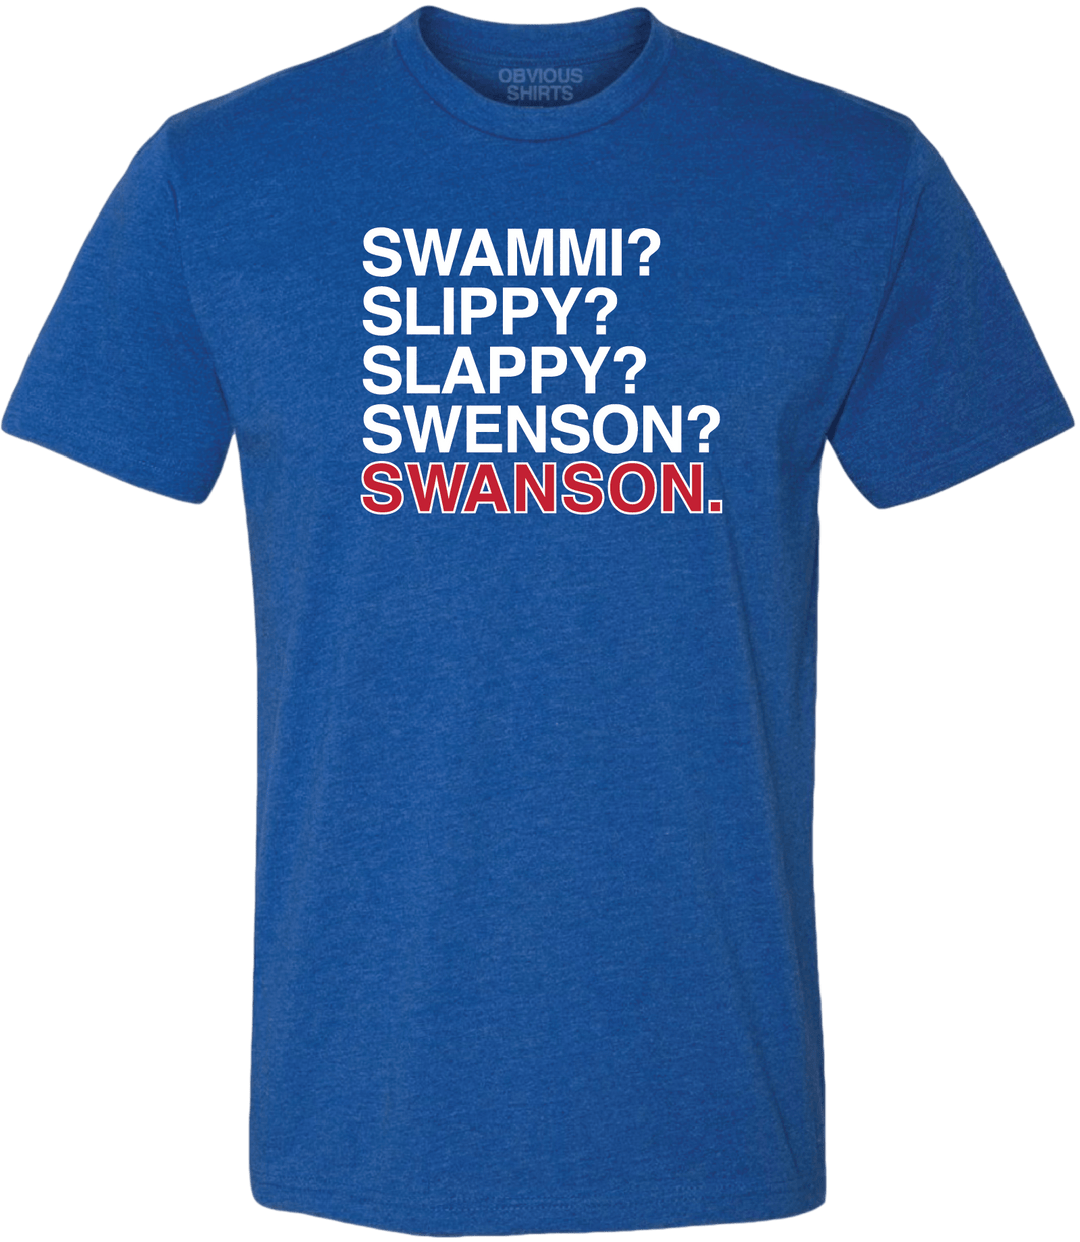 IT STARTS WITH AN "S". - OBVIOUS SHIRTS